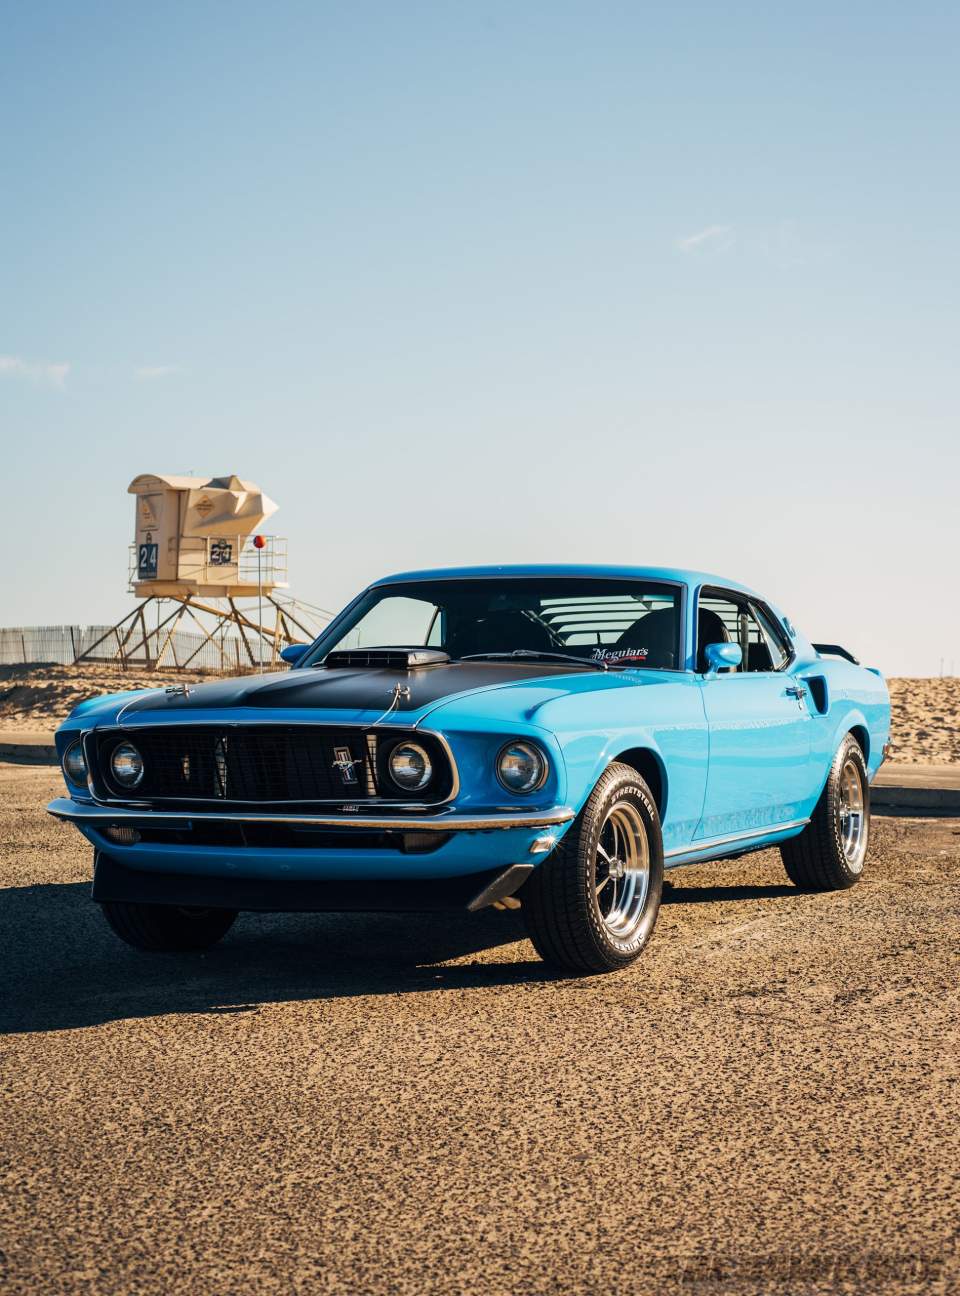 Front shot of the Blue 1969 Mustang Mach 1 parked at the beach with a lifeguard tower in the background